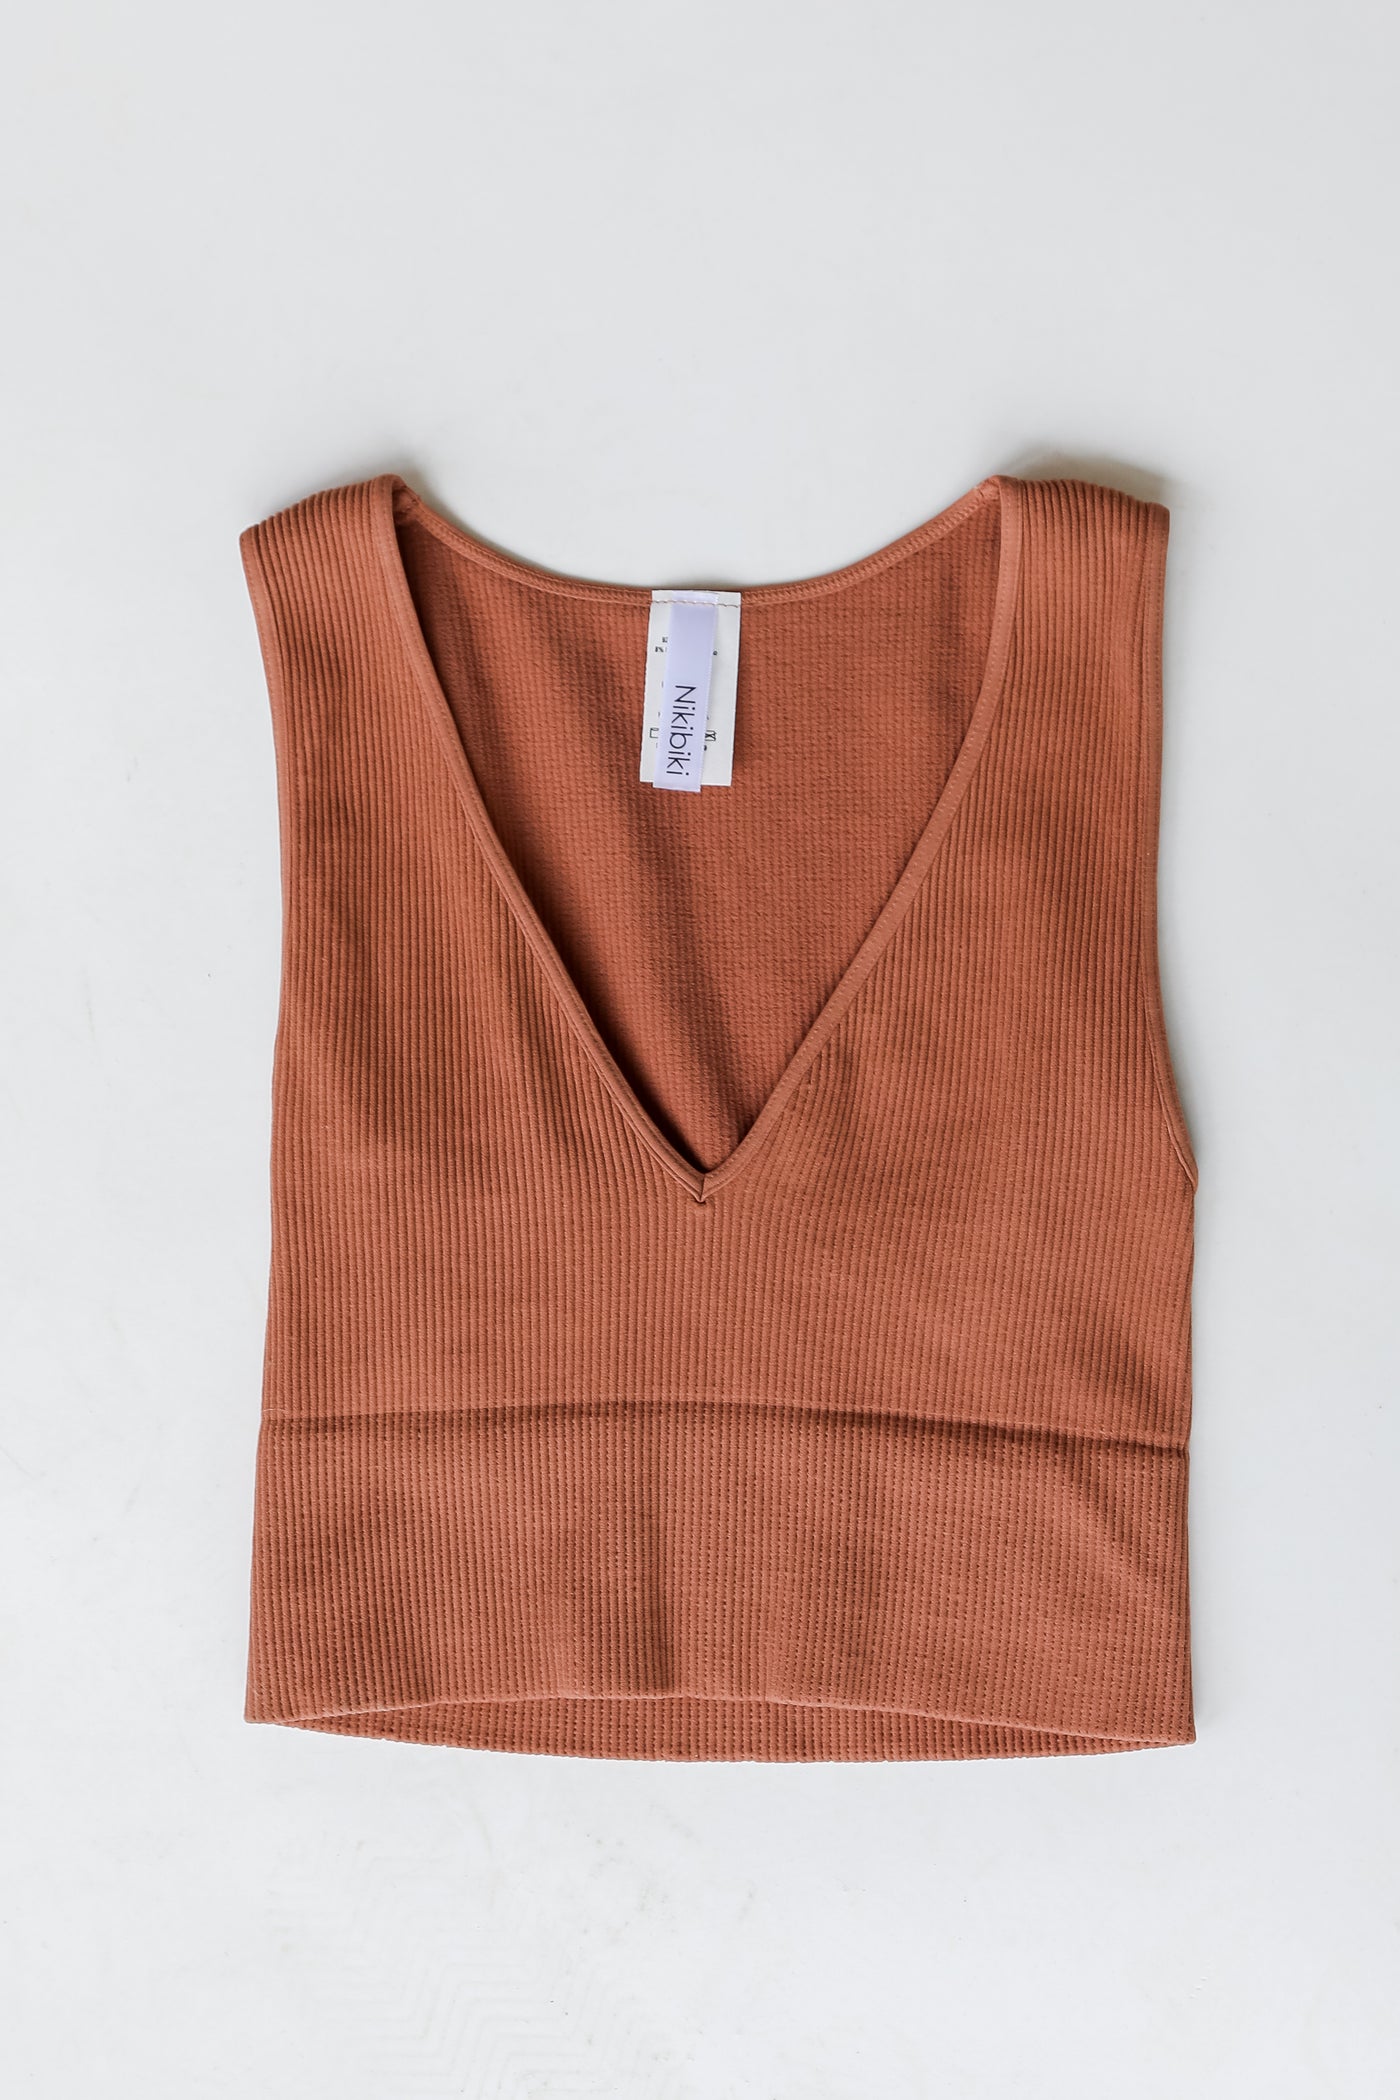 V-Neck Ribbed Cropped Tank in cognac flat lay